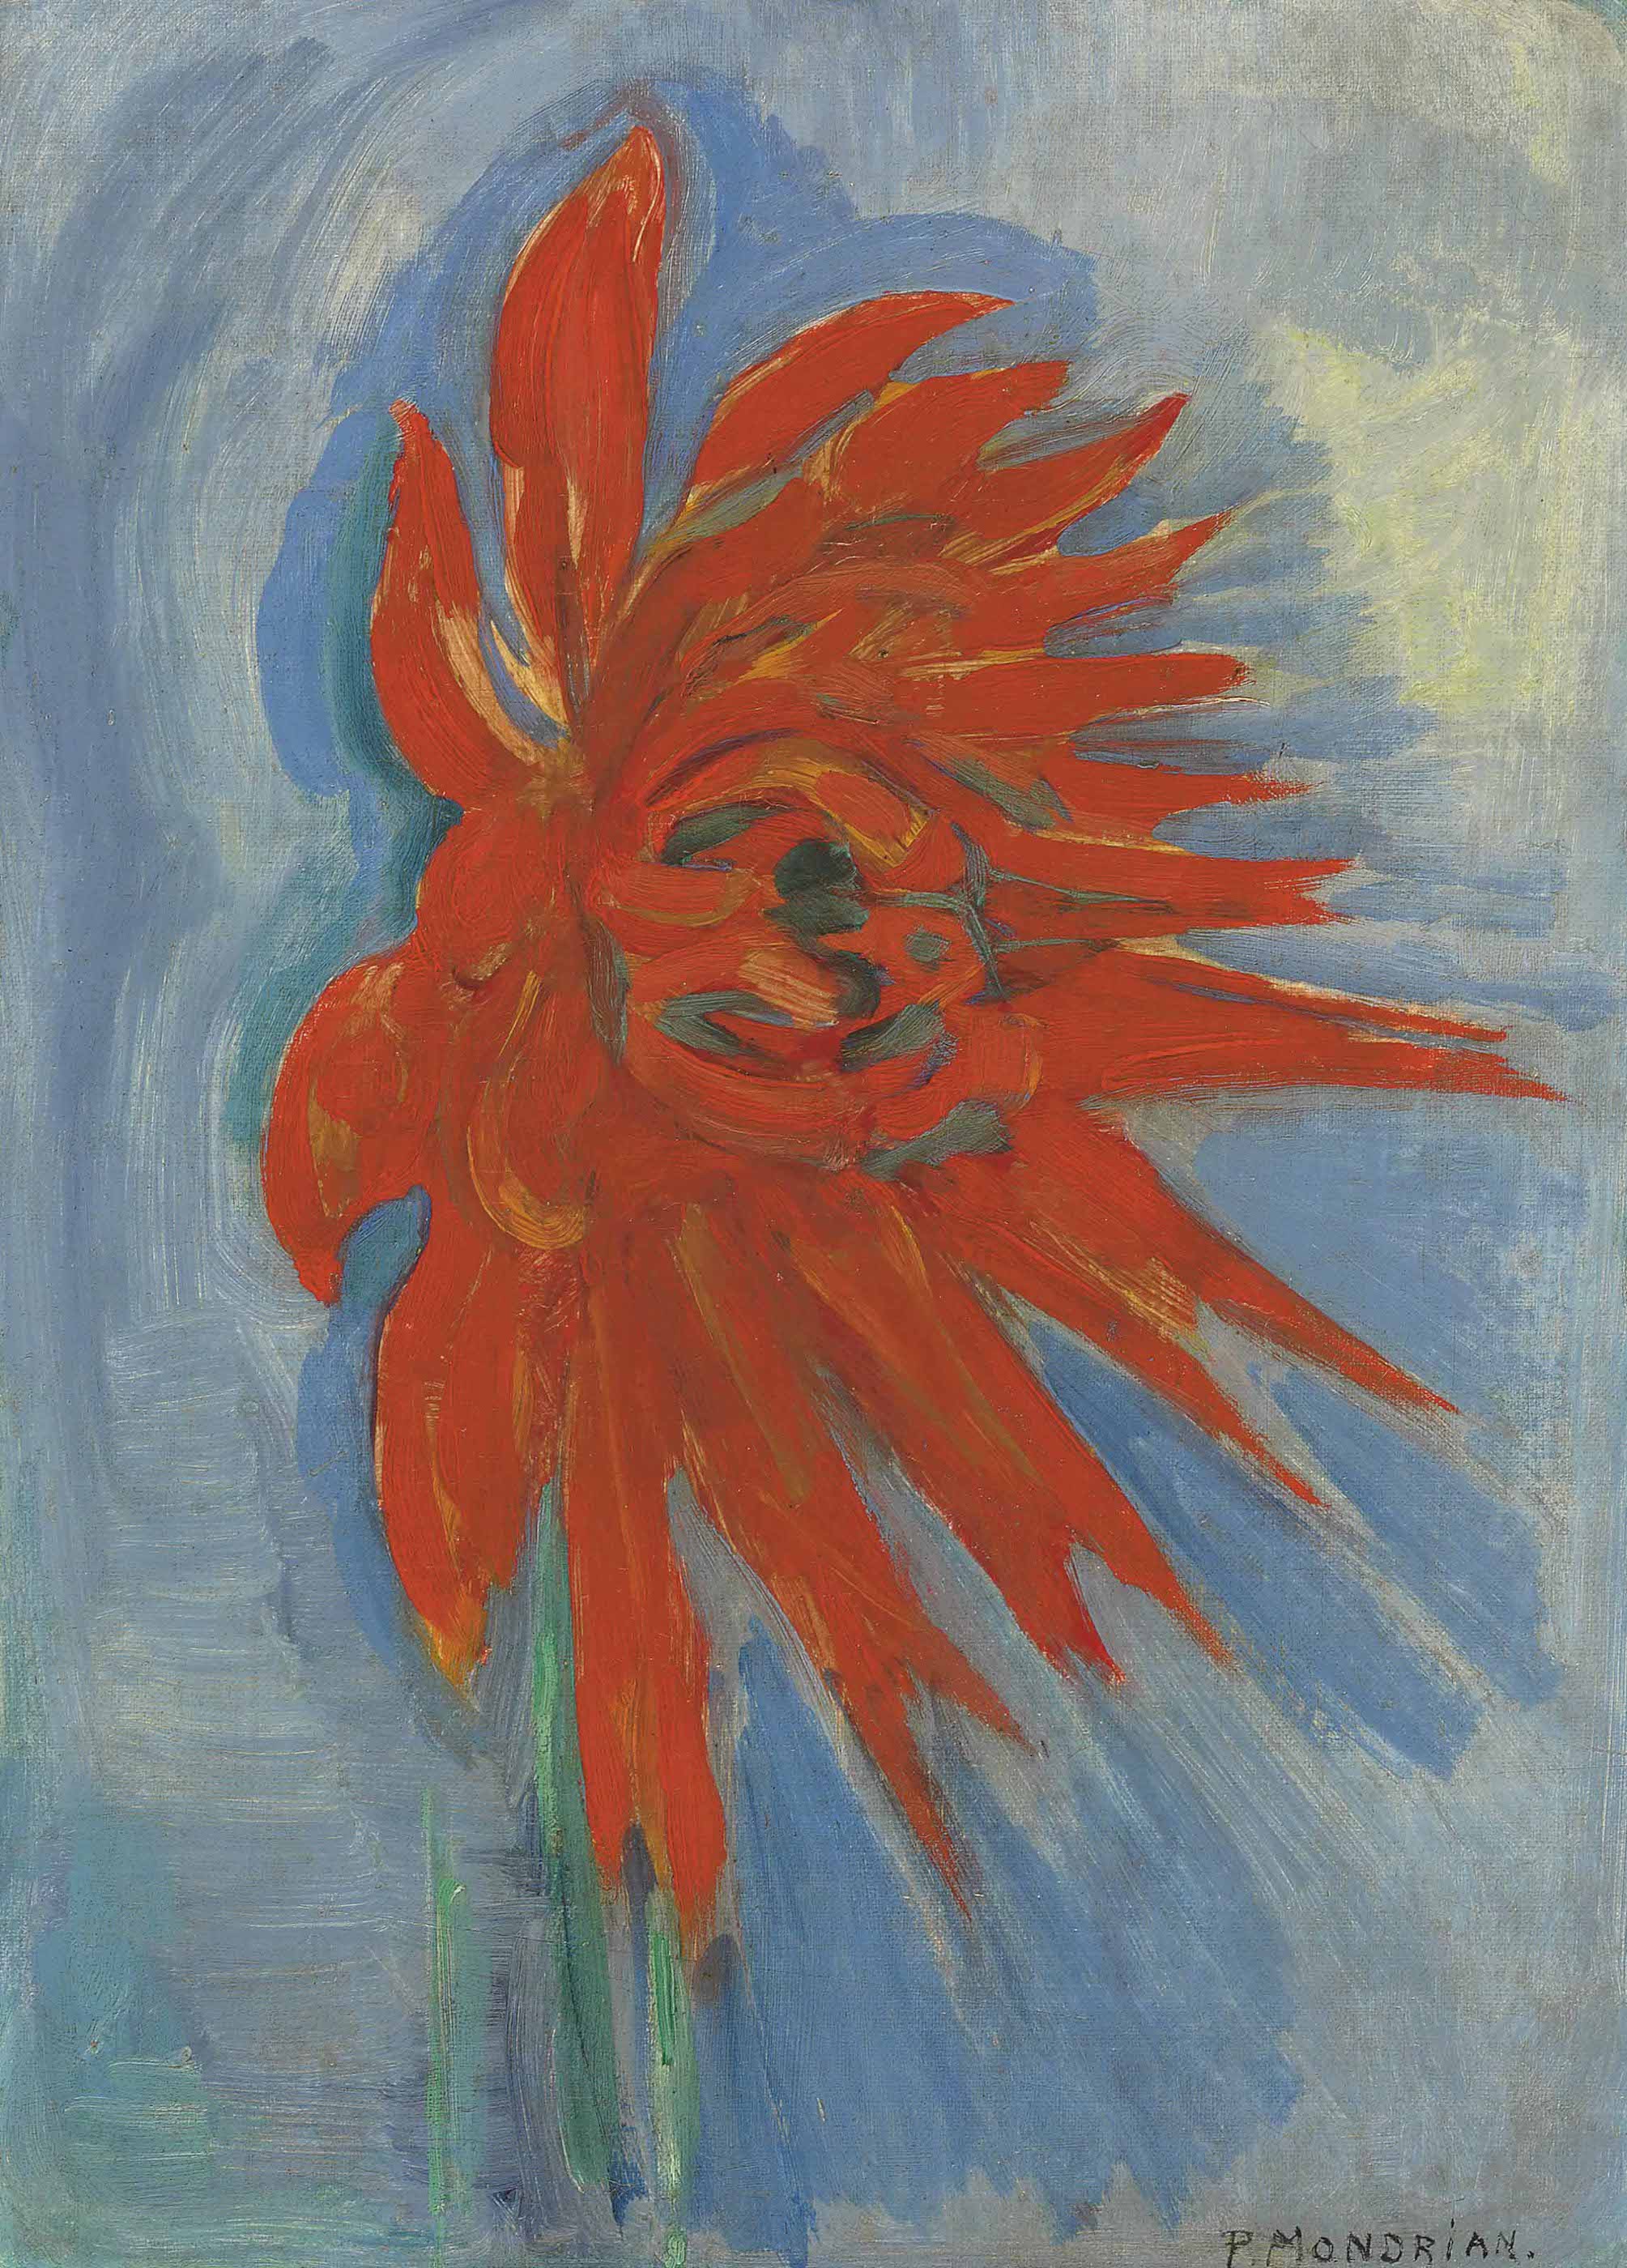 Red Chrysanthemum on Blue Background by Piet Mondrian - c. 1909-1910 - 41.9 x 30.5 cm private collection